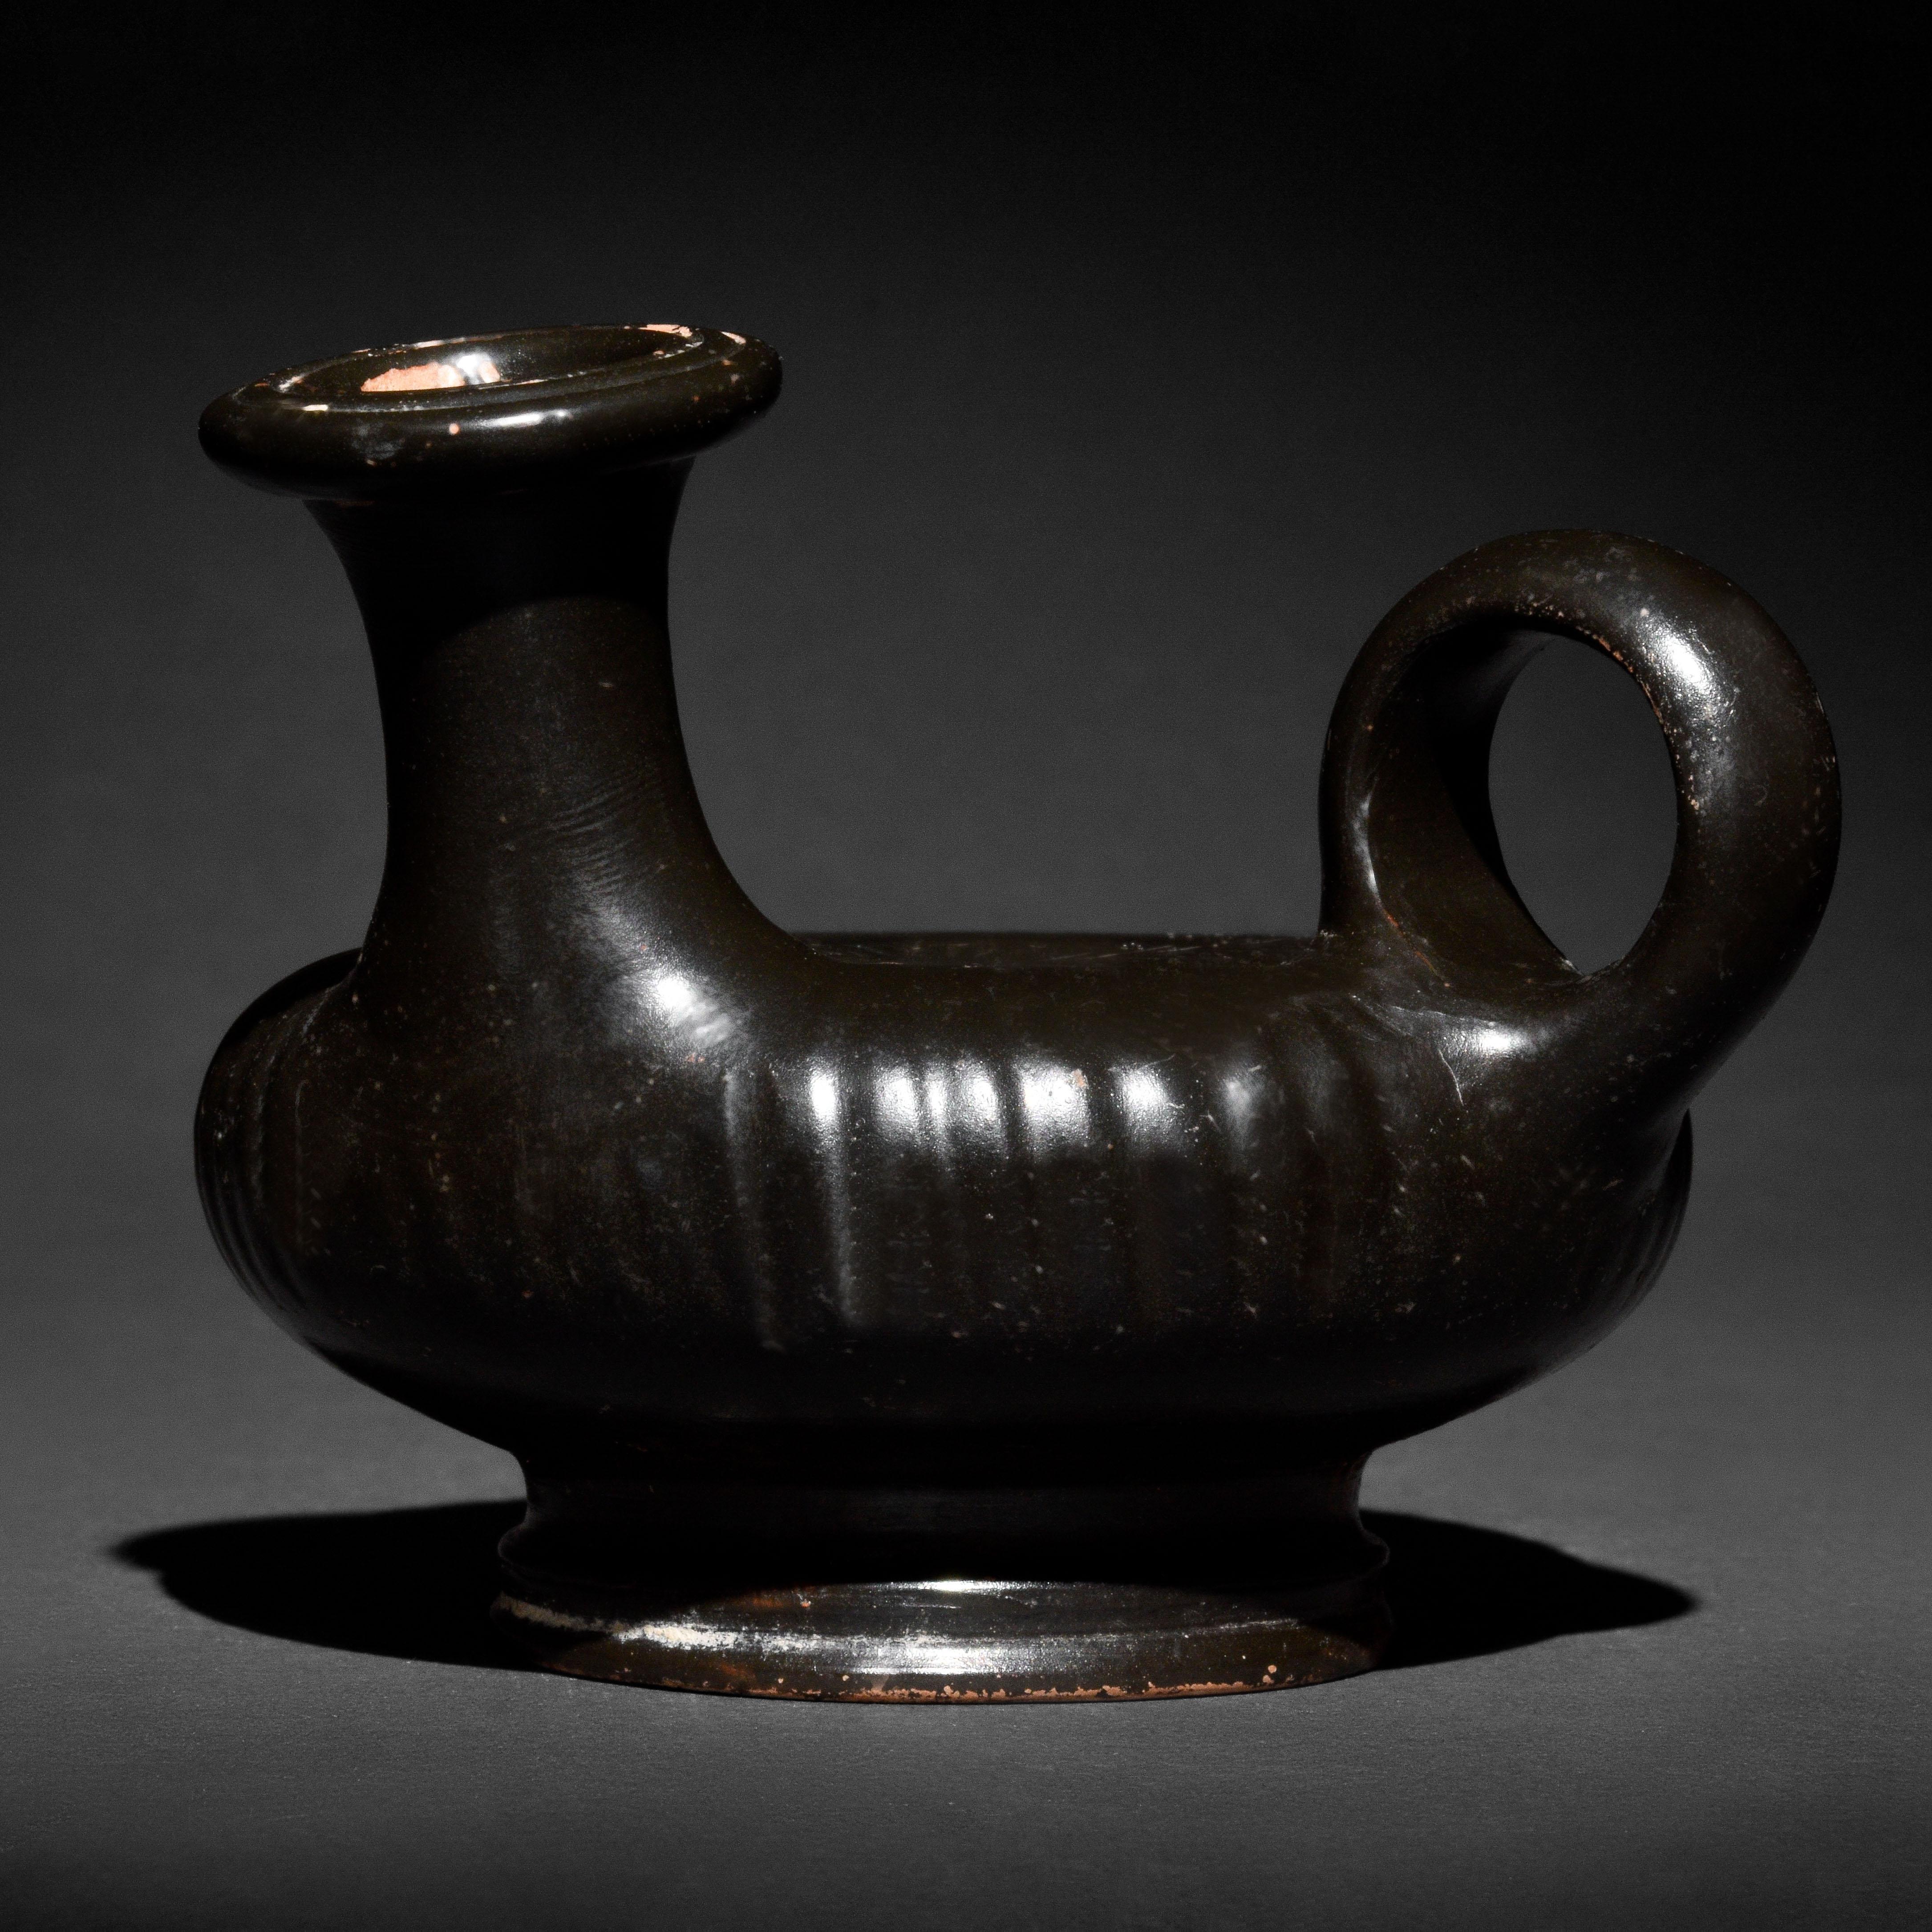 A black-glazed terracotta guttus (oil-lamp filler) with a spool-shaped foot, a wheel-shaped body, a protruding ring handle, and a cylindrical spout with an everted rim. The tondo features a rosette. This type of vessel, a guttus, was used to store